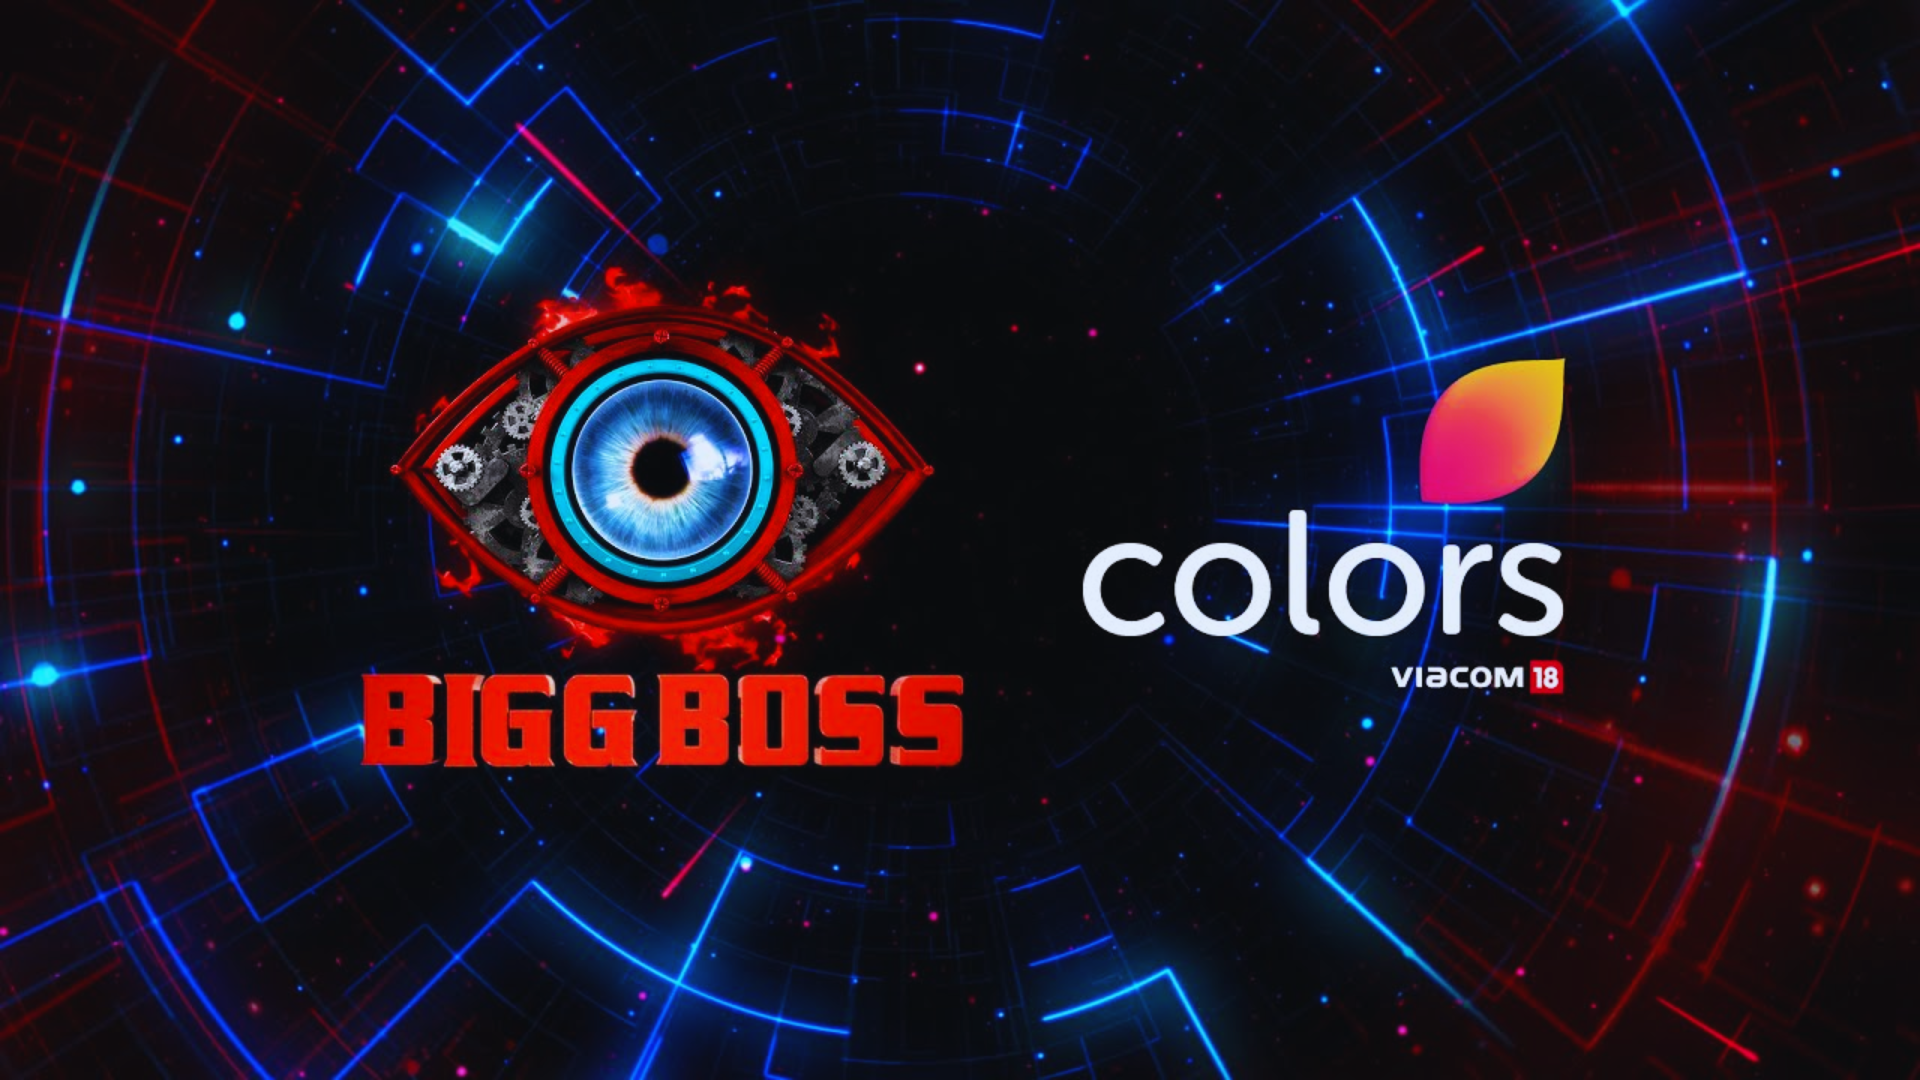 How to Watch Bigg Boss 16 Live Online For Free?